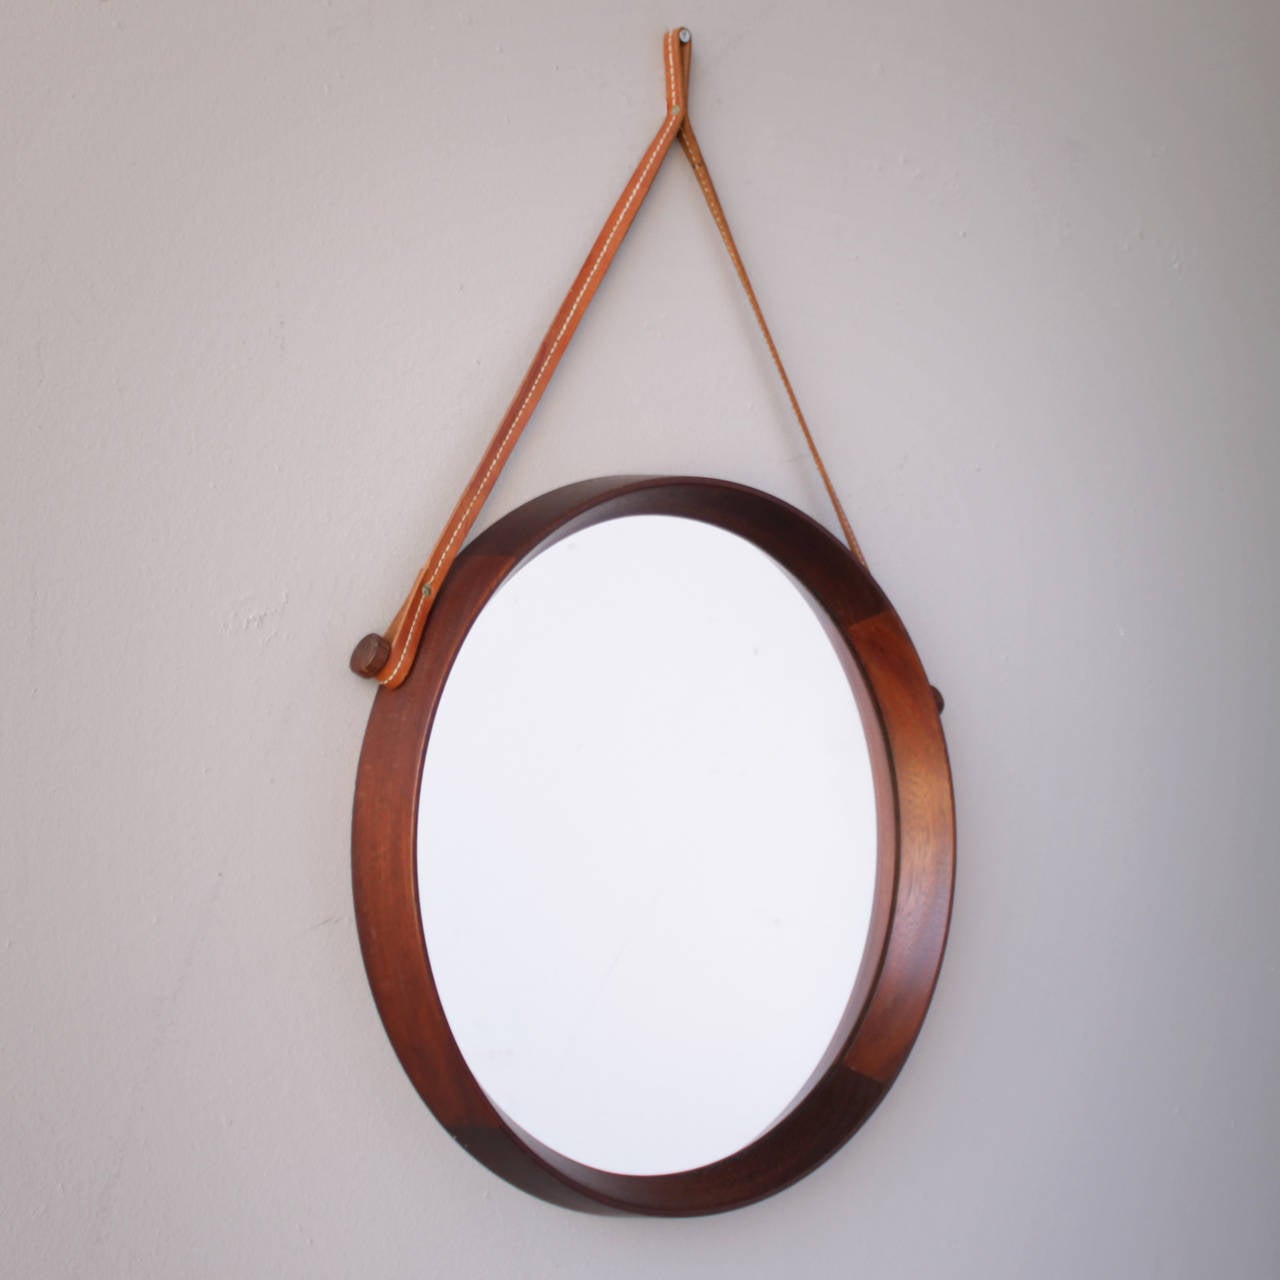 Framed mirror with leather strap by to Uno & Osten Kristiansson for Luxus, Sweden. Nice decorative mirror executed in teak. Beautiful condition.